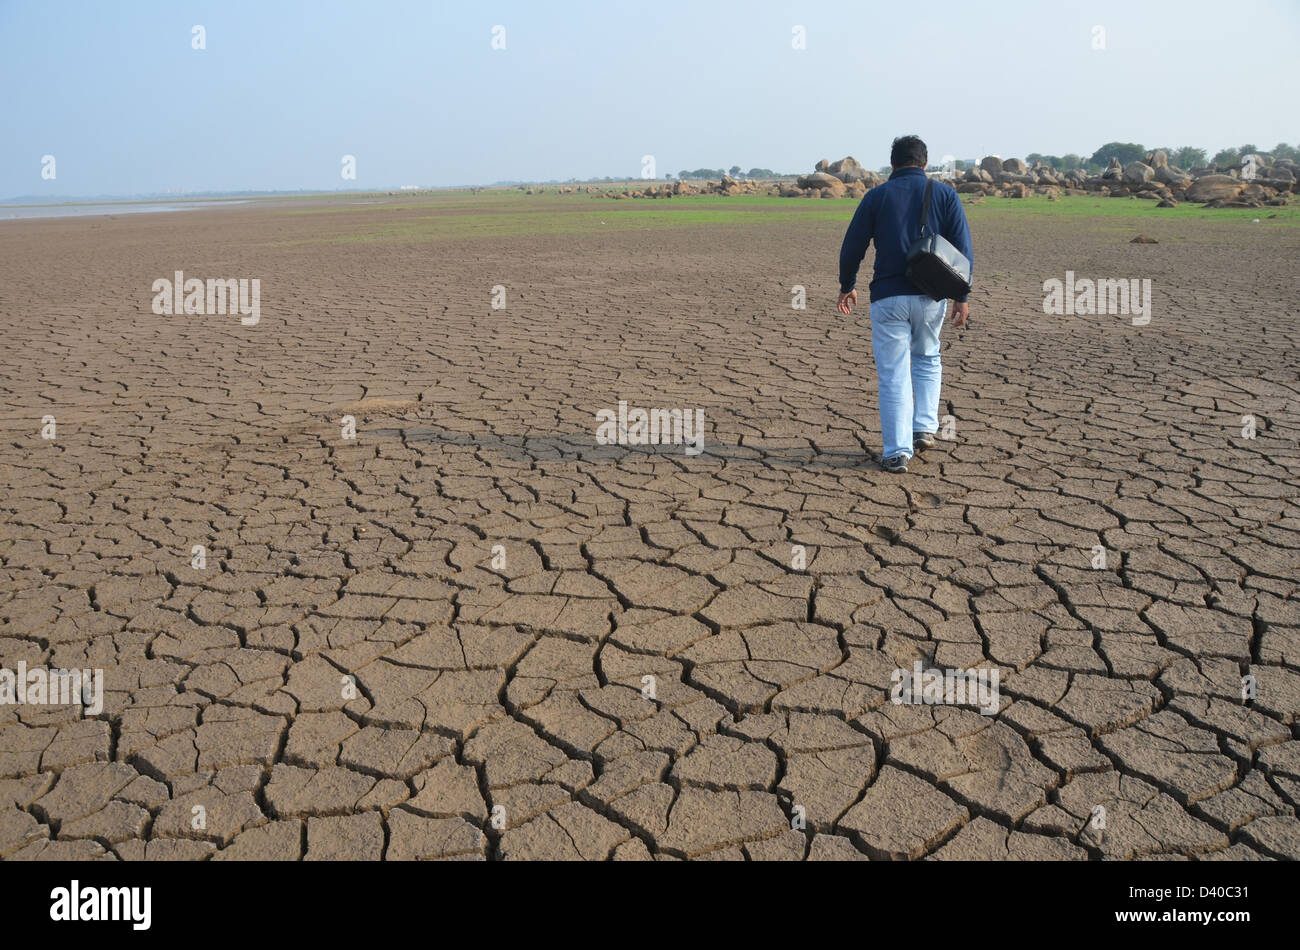 Dry land in South India Stock Photo